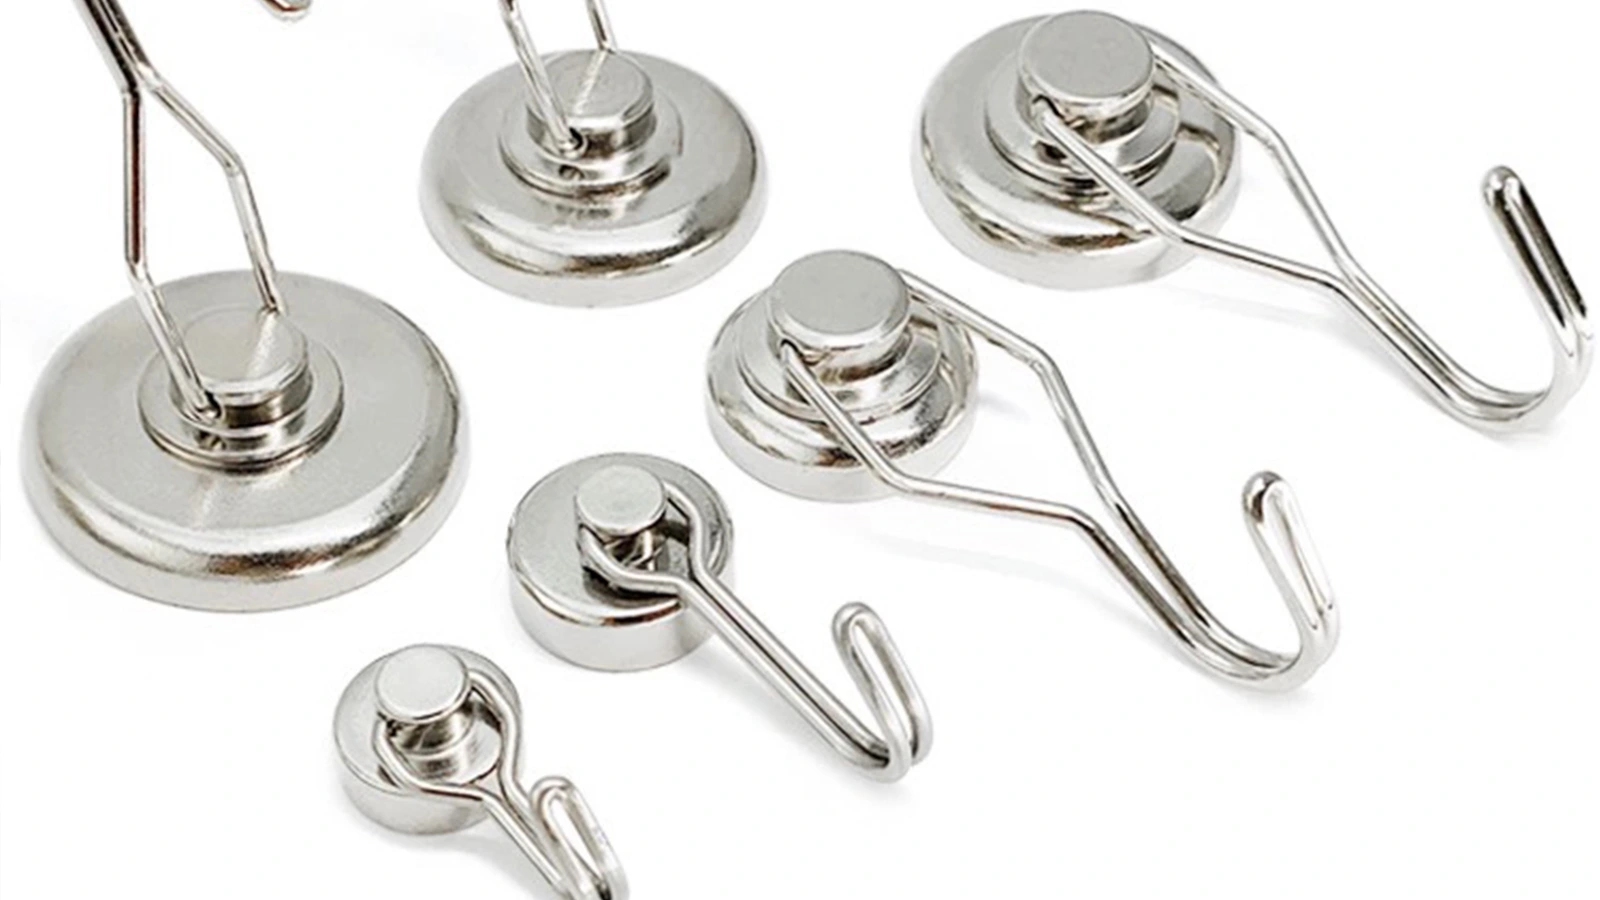 Types of Shower Curtain Hooks: A set of metal hooks and hooks on a white background.